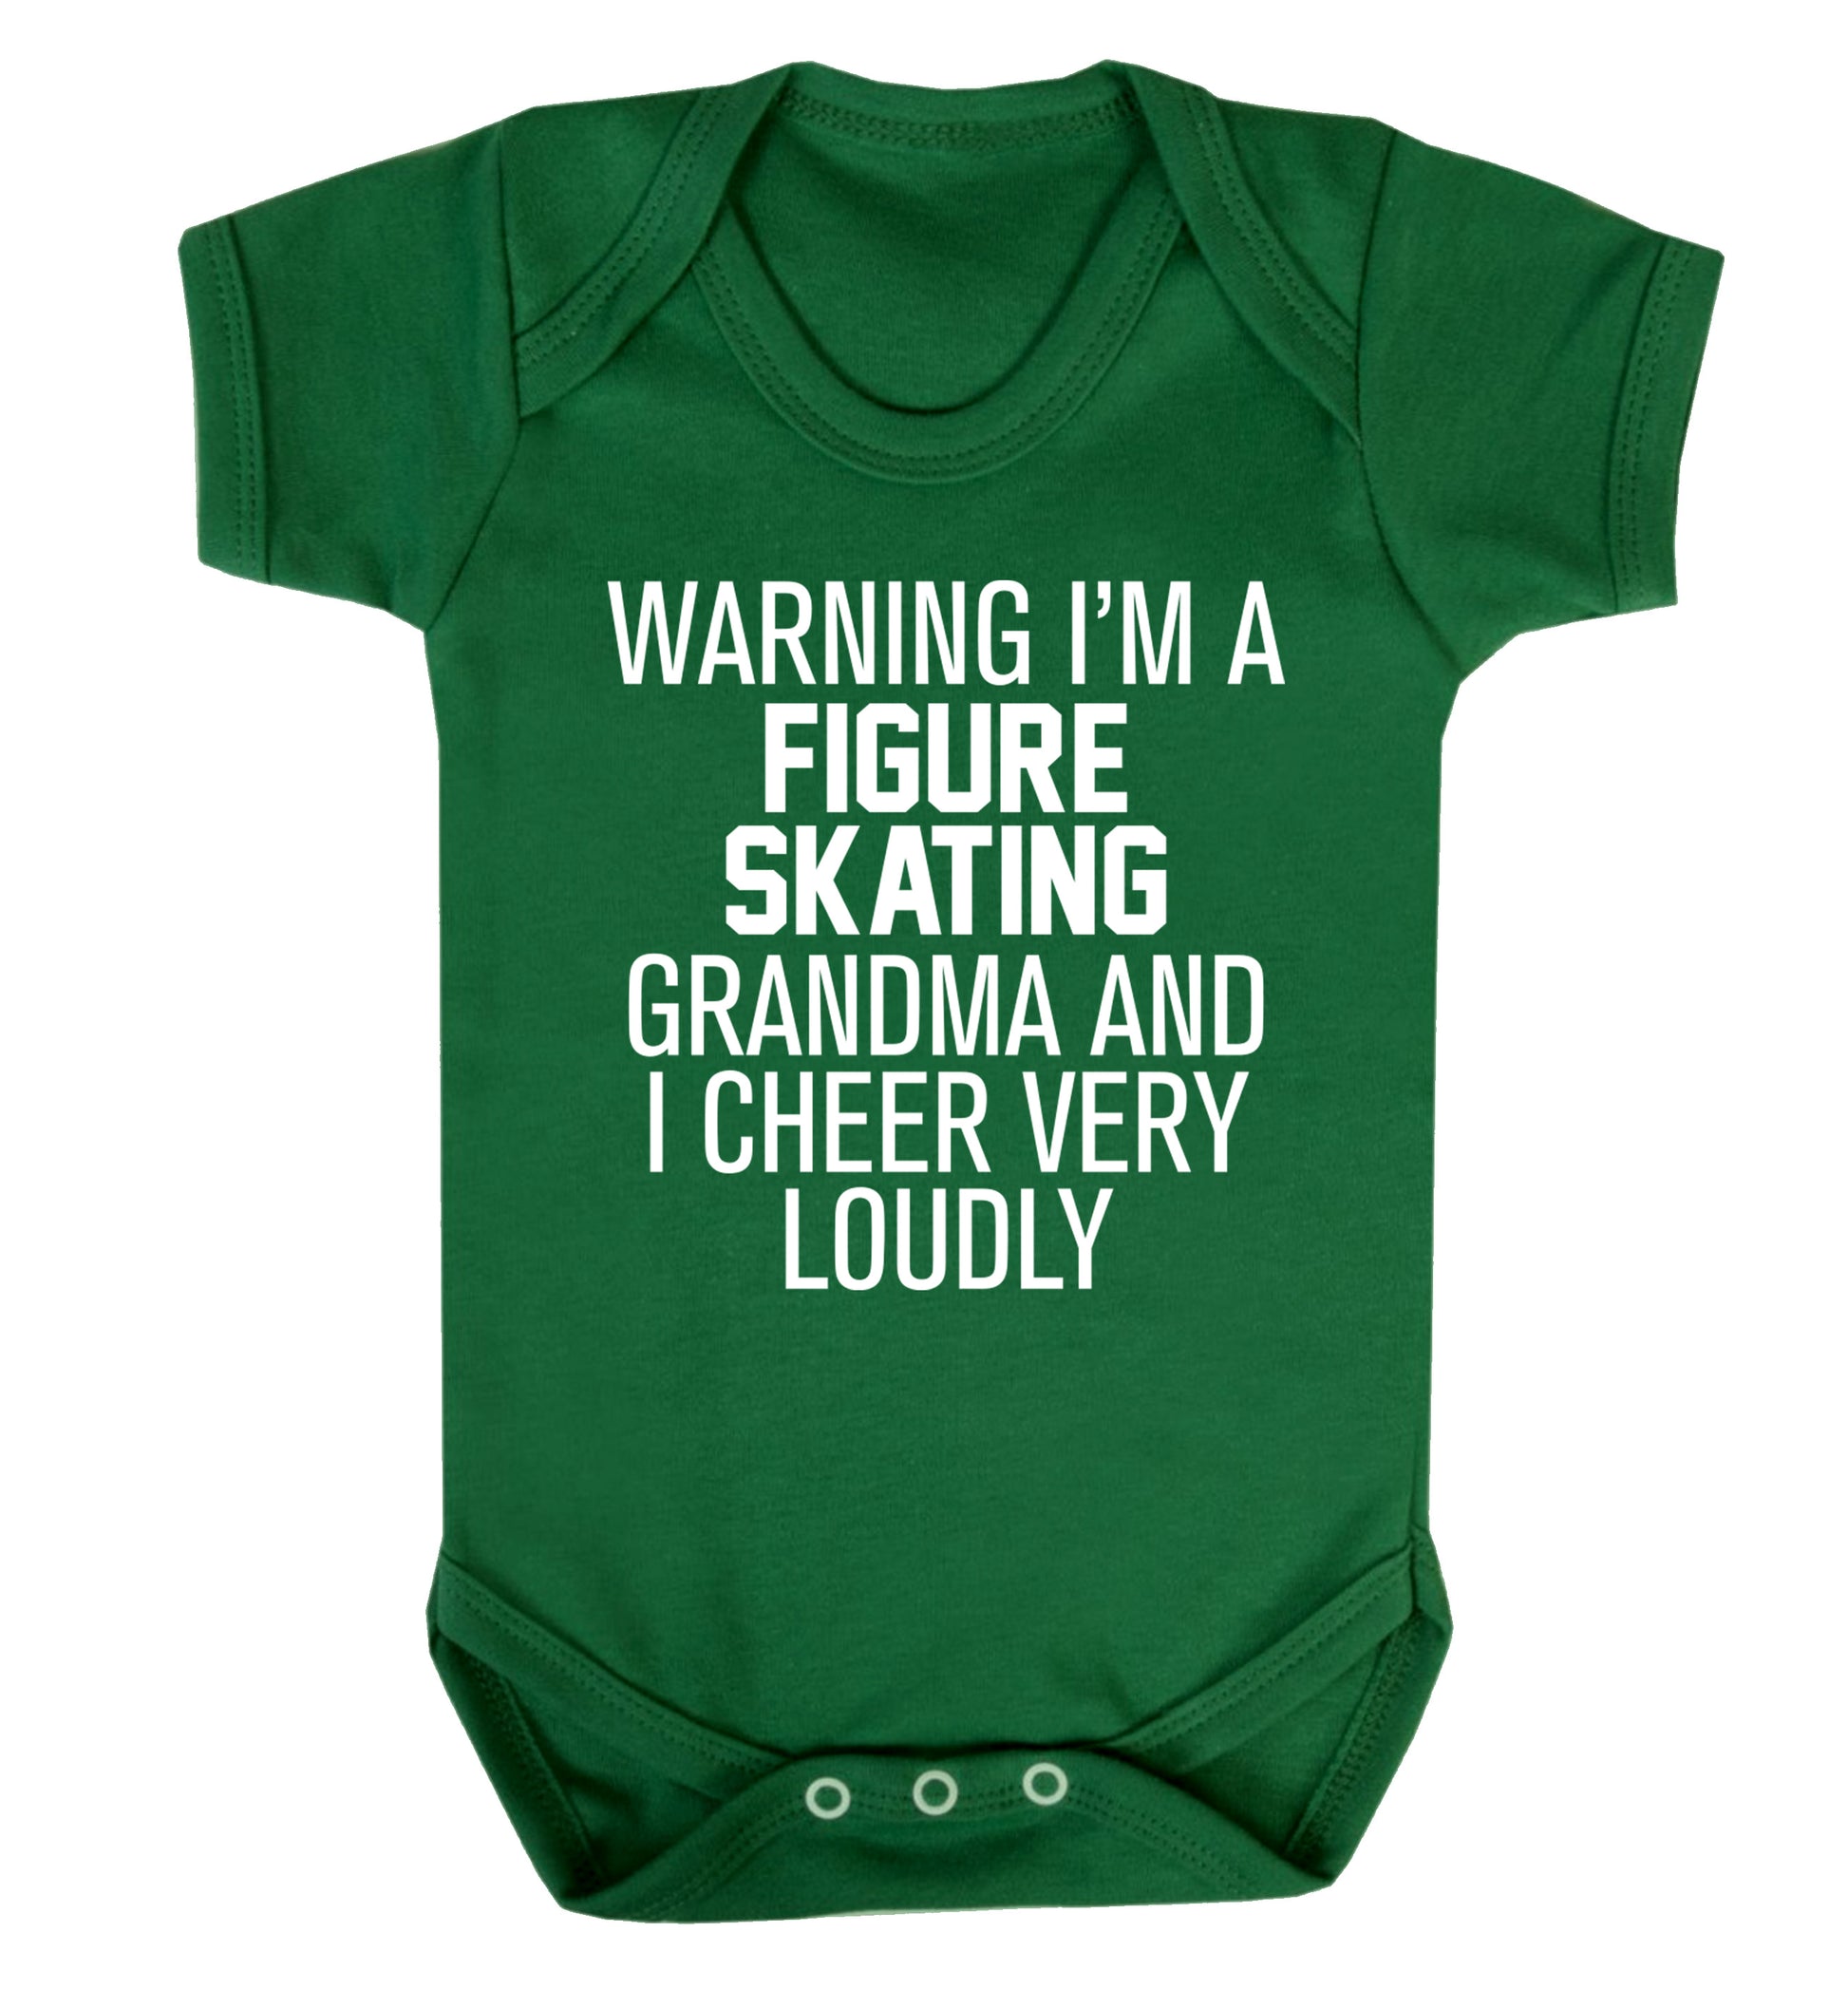 Warning I'm a figure skating grandma and I cheer very loudly Baby Vest green 18-24 months